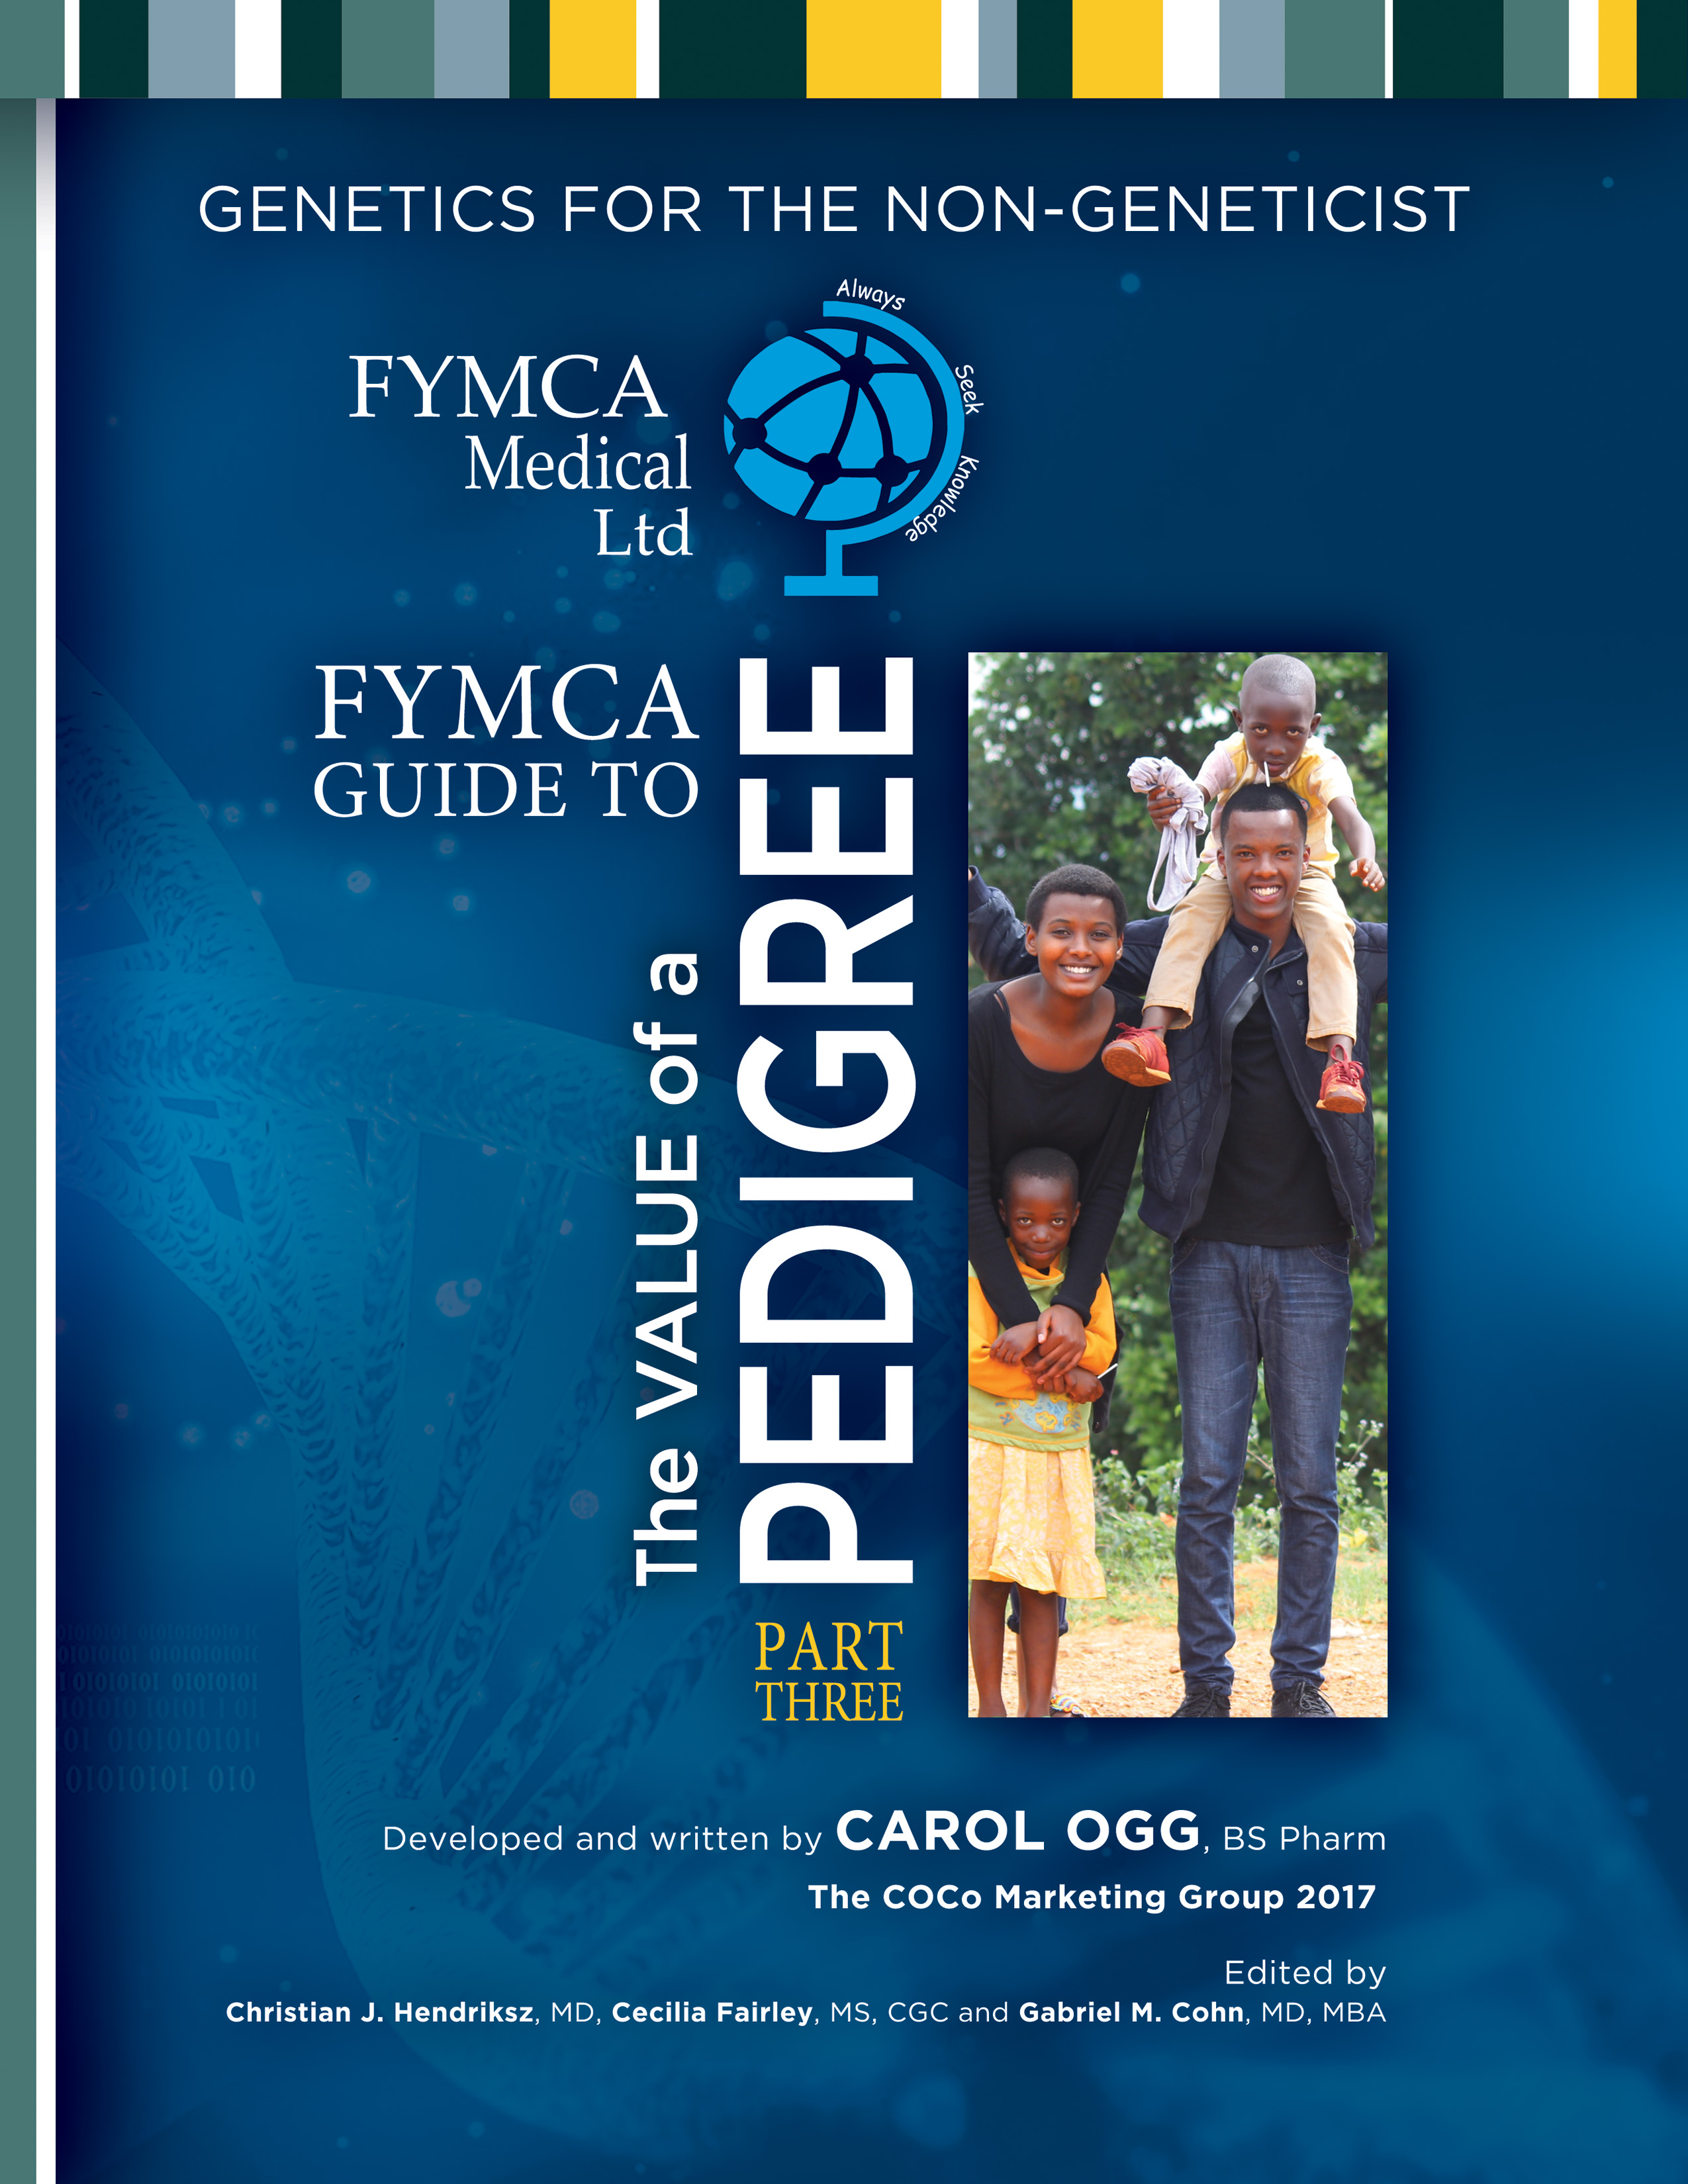 FYMCA: Guide to the Value of a Pedigree (Part 3) E-Book